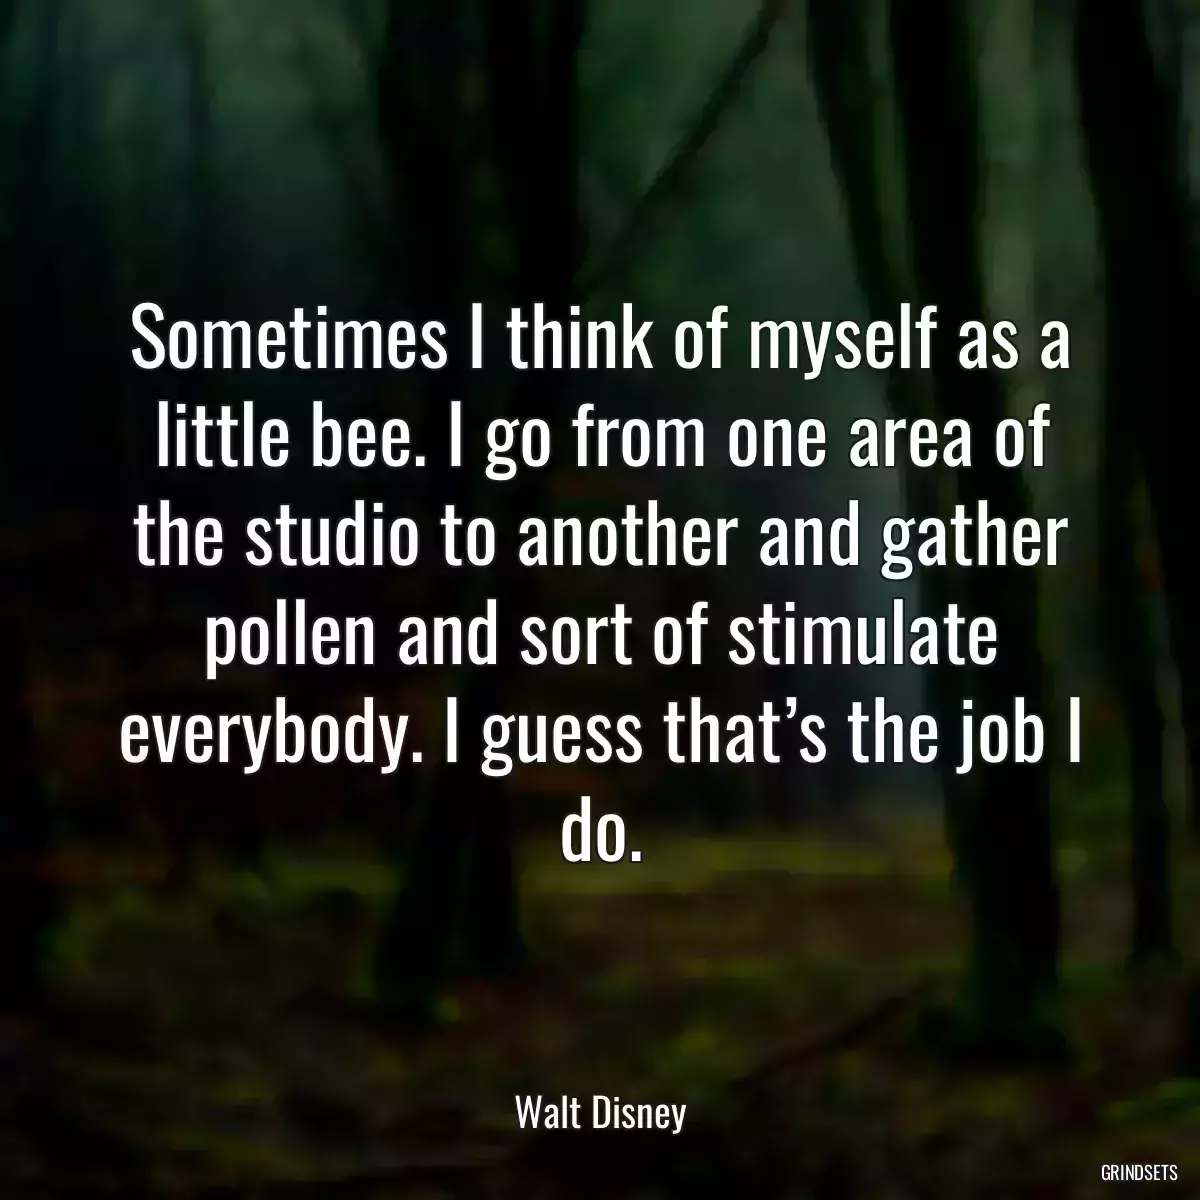 Sometimes I think of myself as a little bee. I go from one area of the studio to another and gather pollen and sort of stimulate everybody. I guess that’s the job I do.